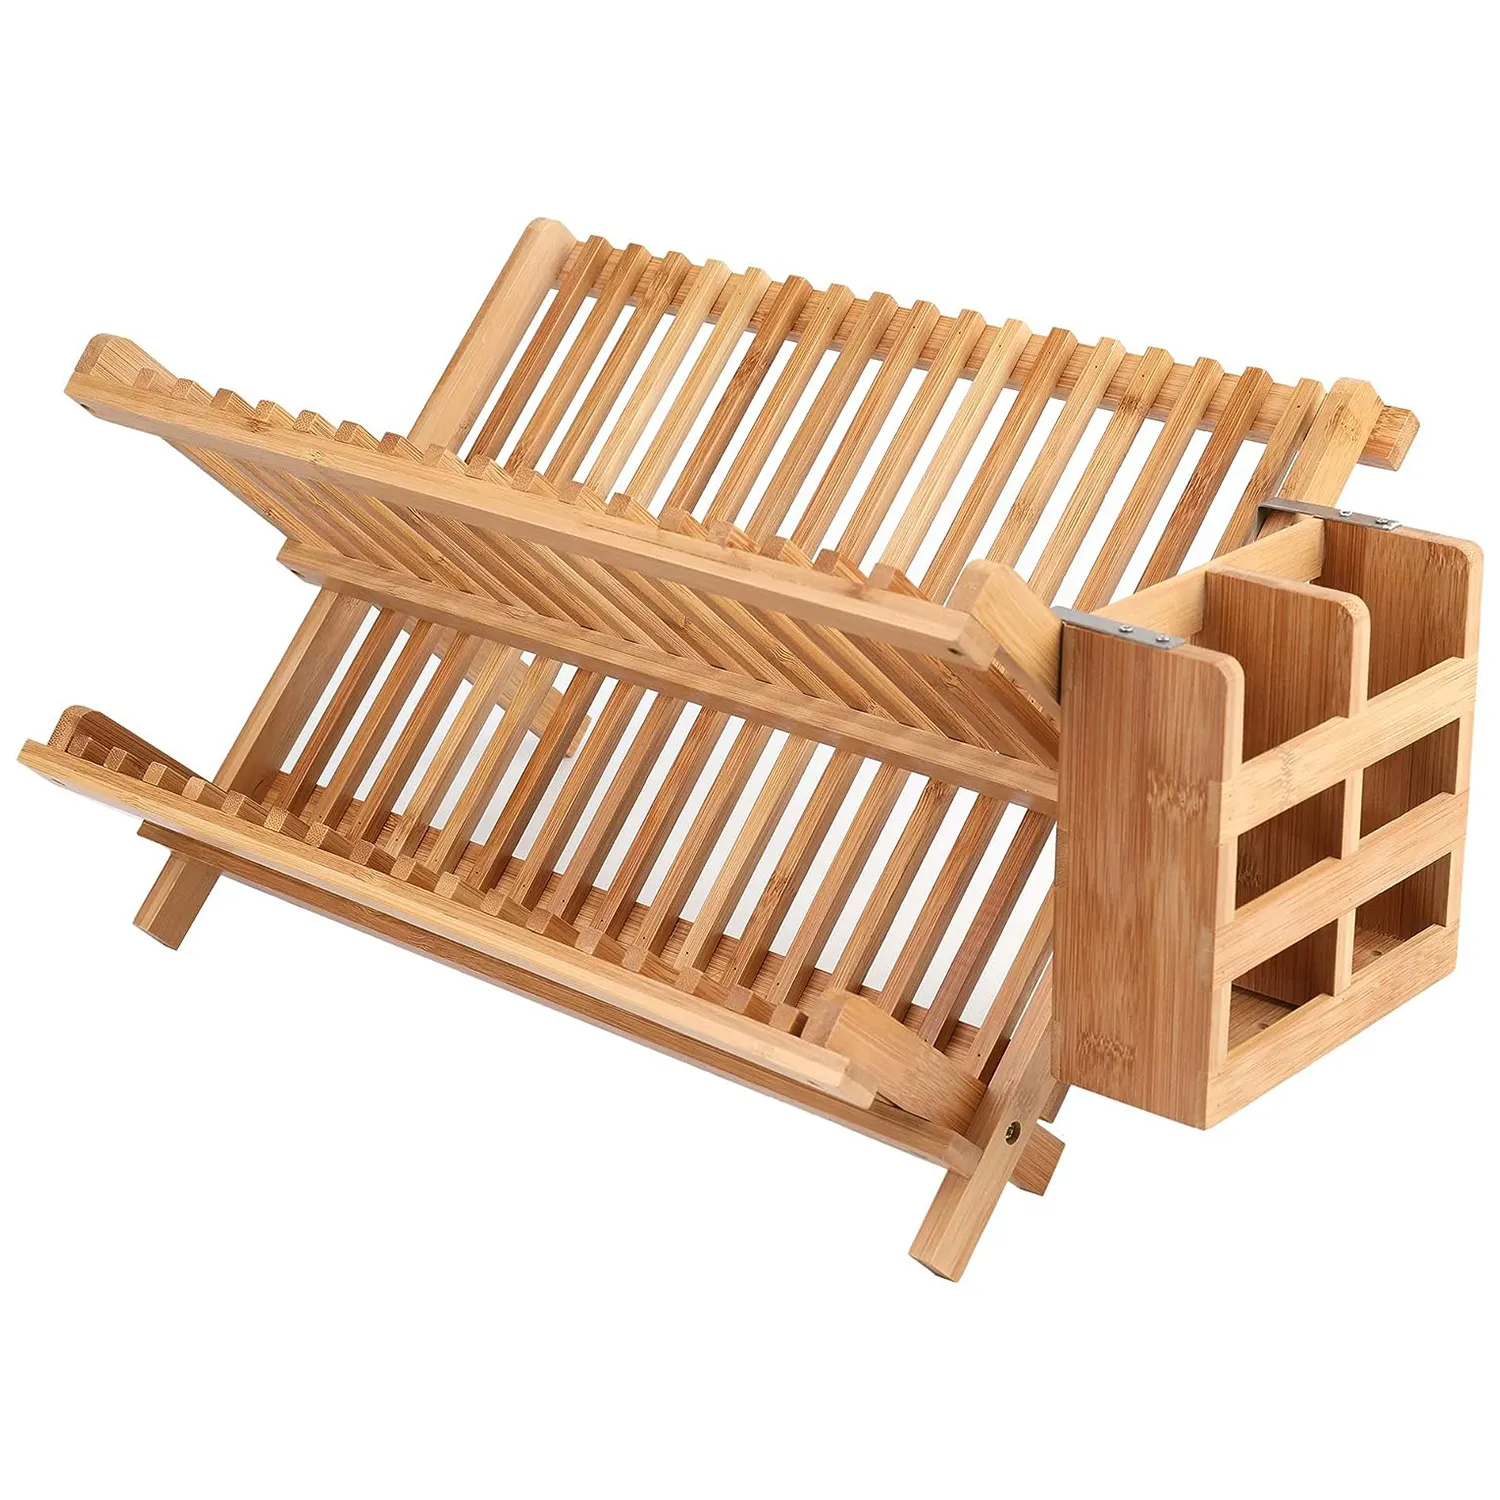 2-Tier Foldable Bamboo Dish Drying Rack Collapsible Plate Organizer for Sink Shelf & Storage for Plates Cups Mugs Flatwares